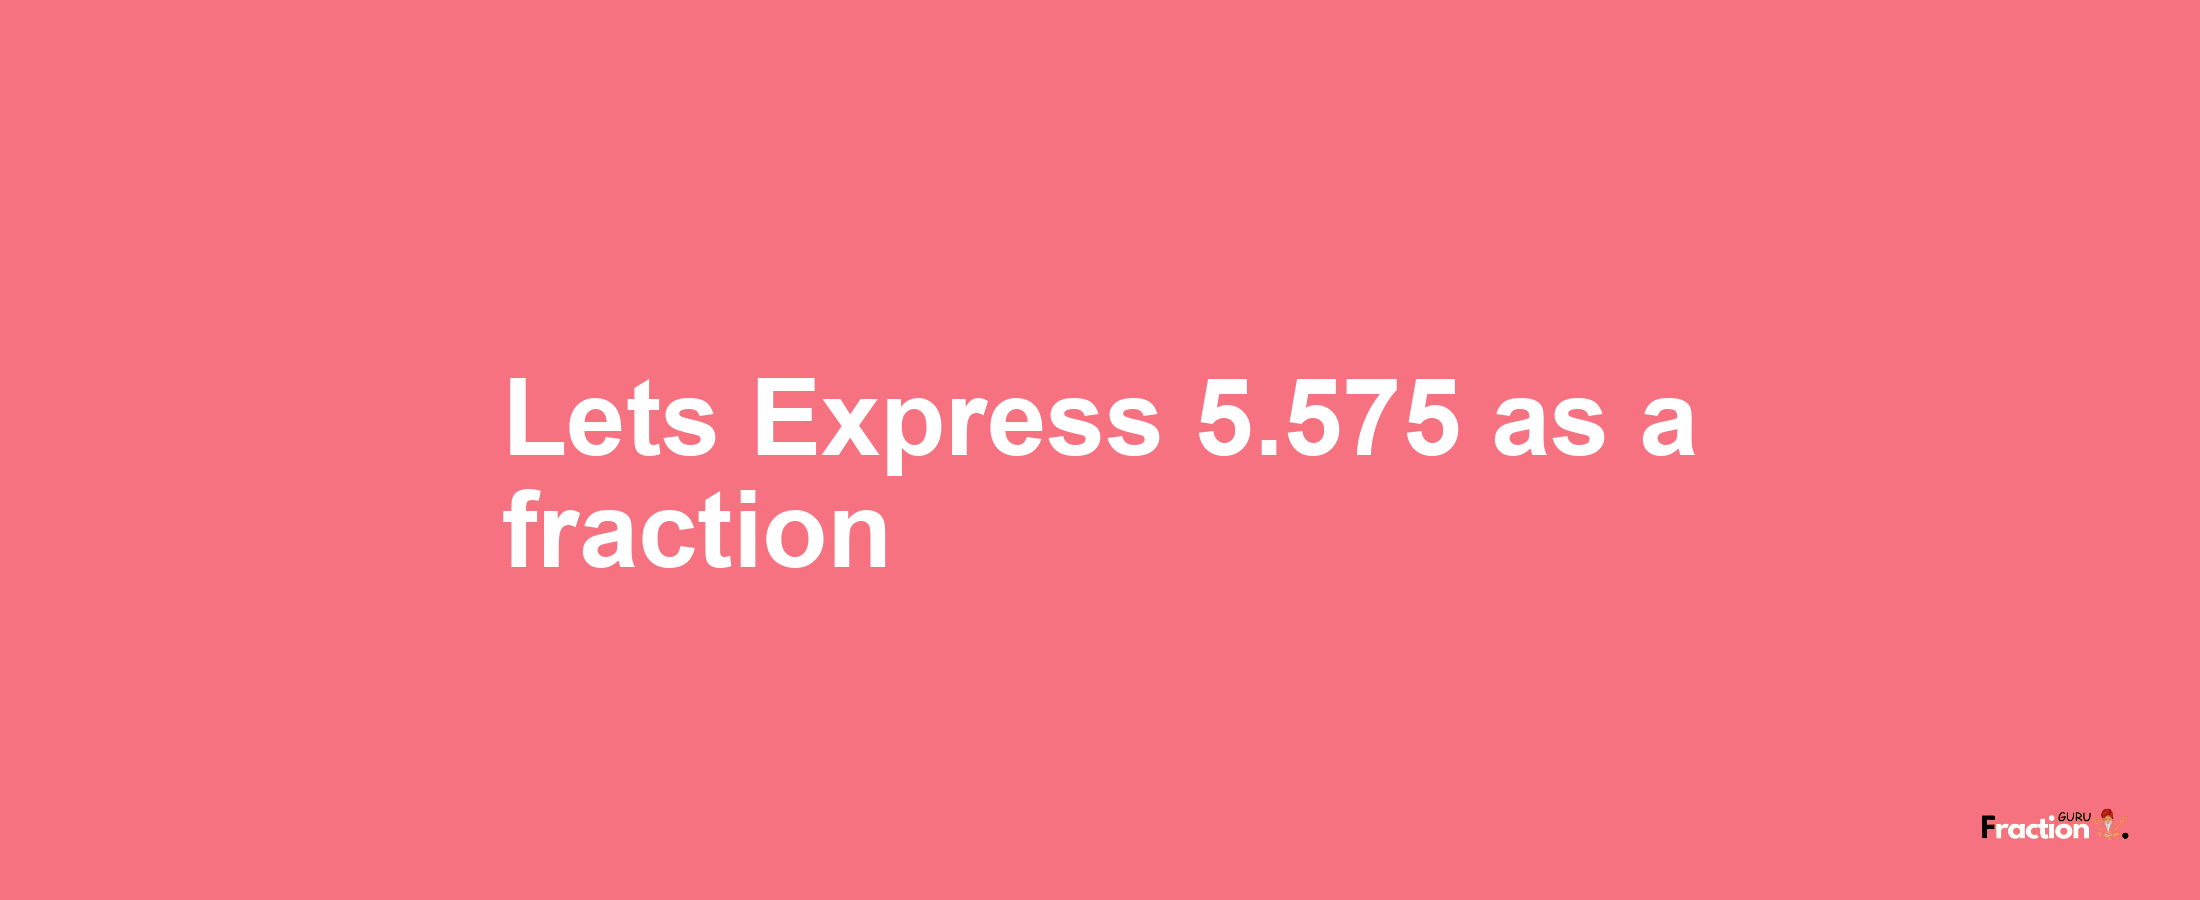 Lets Express 5.575 as afraction